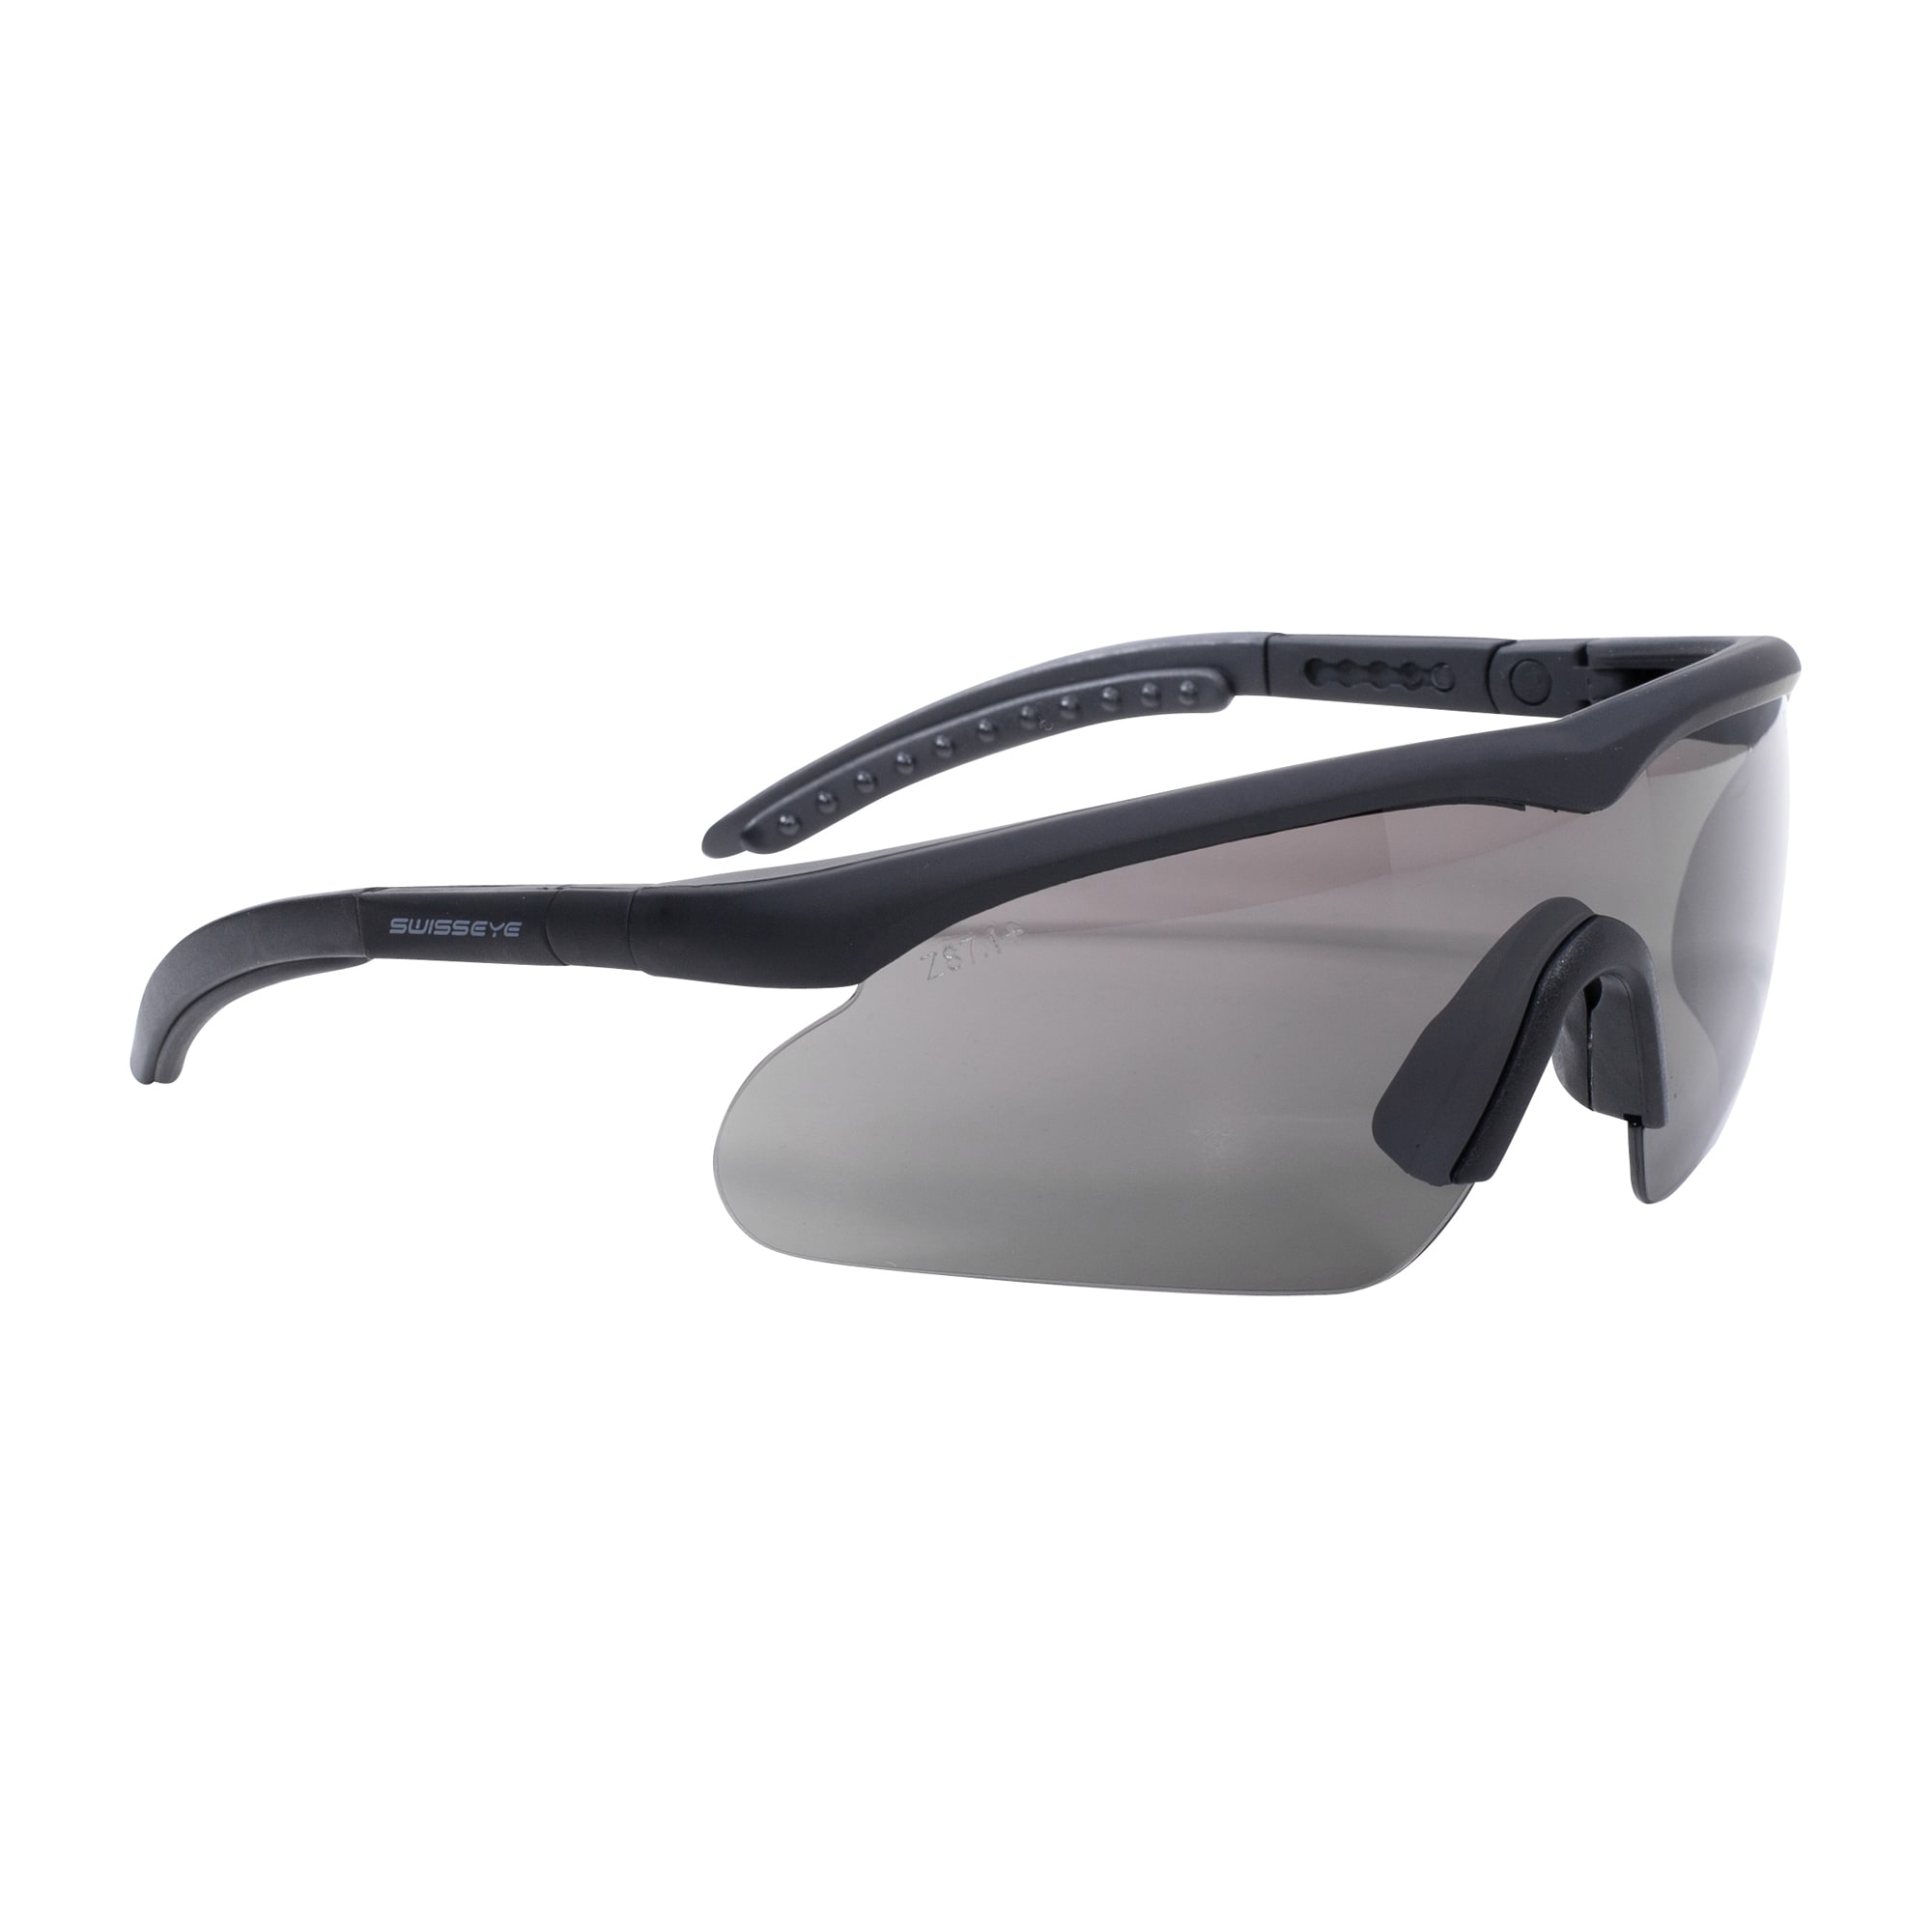 Purchase the Swiss Eye Safety black by Raptor ASMC Glasses